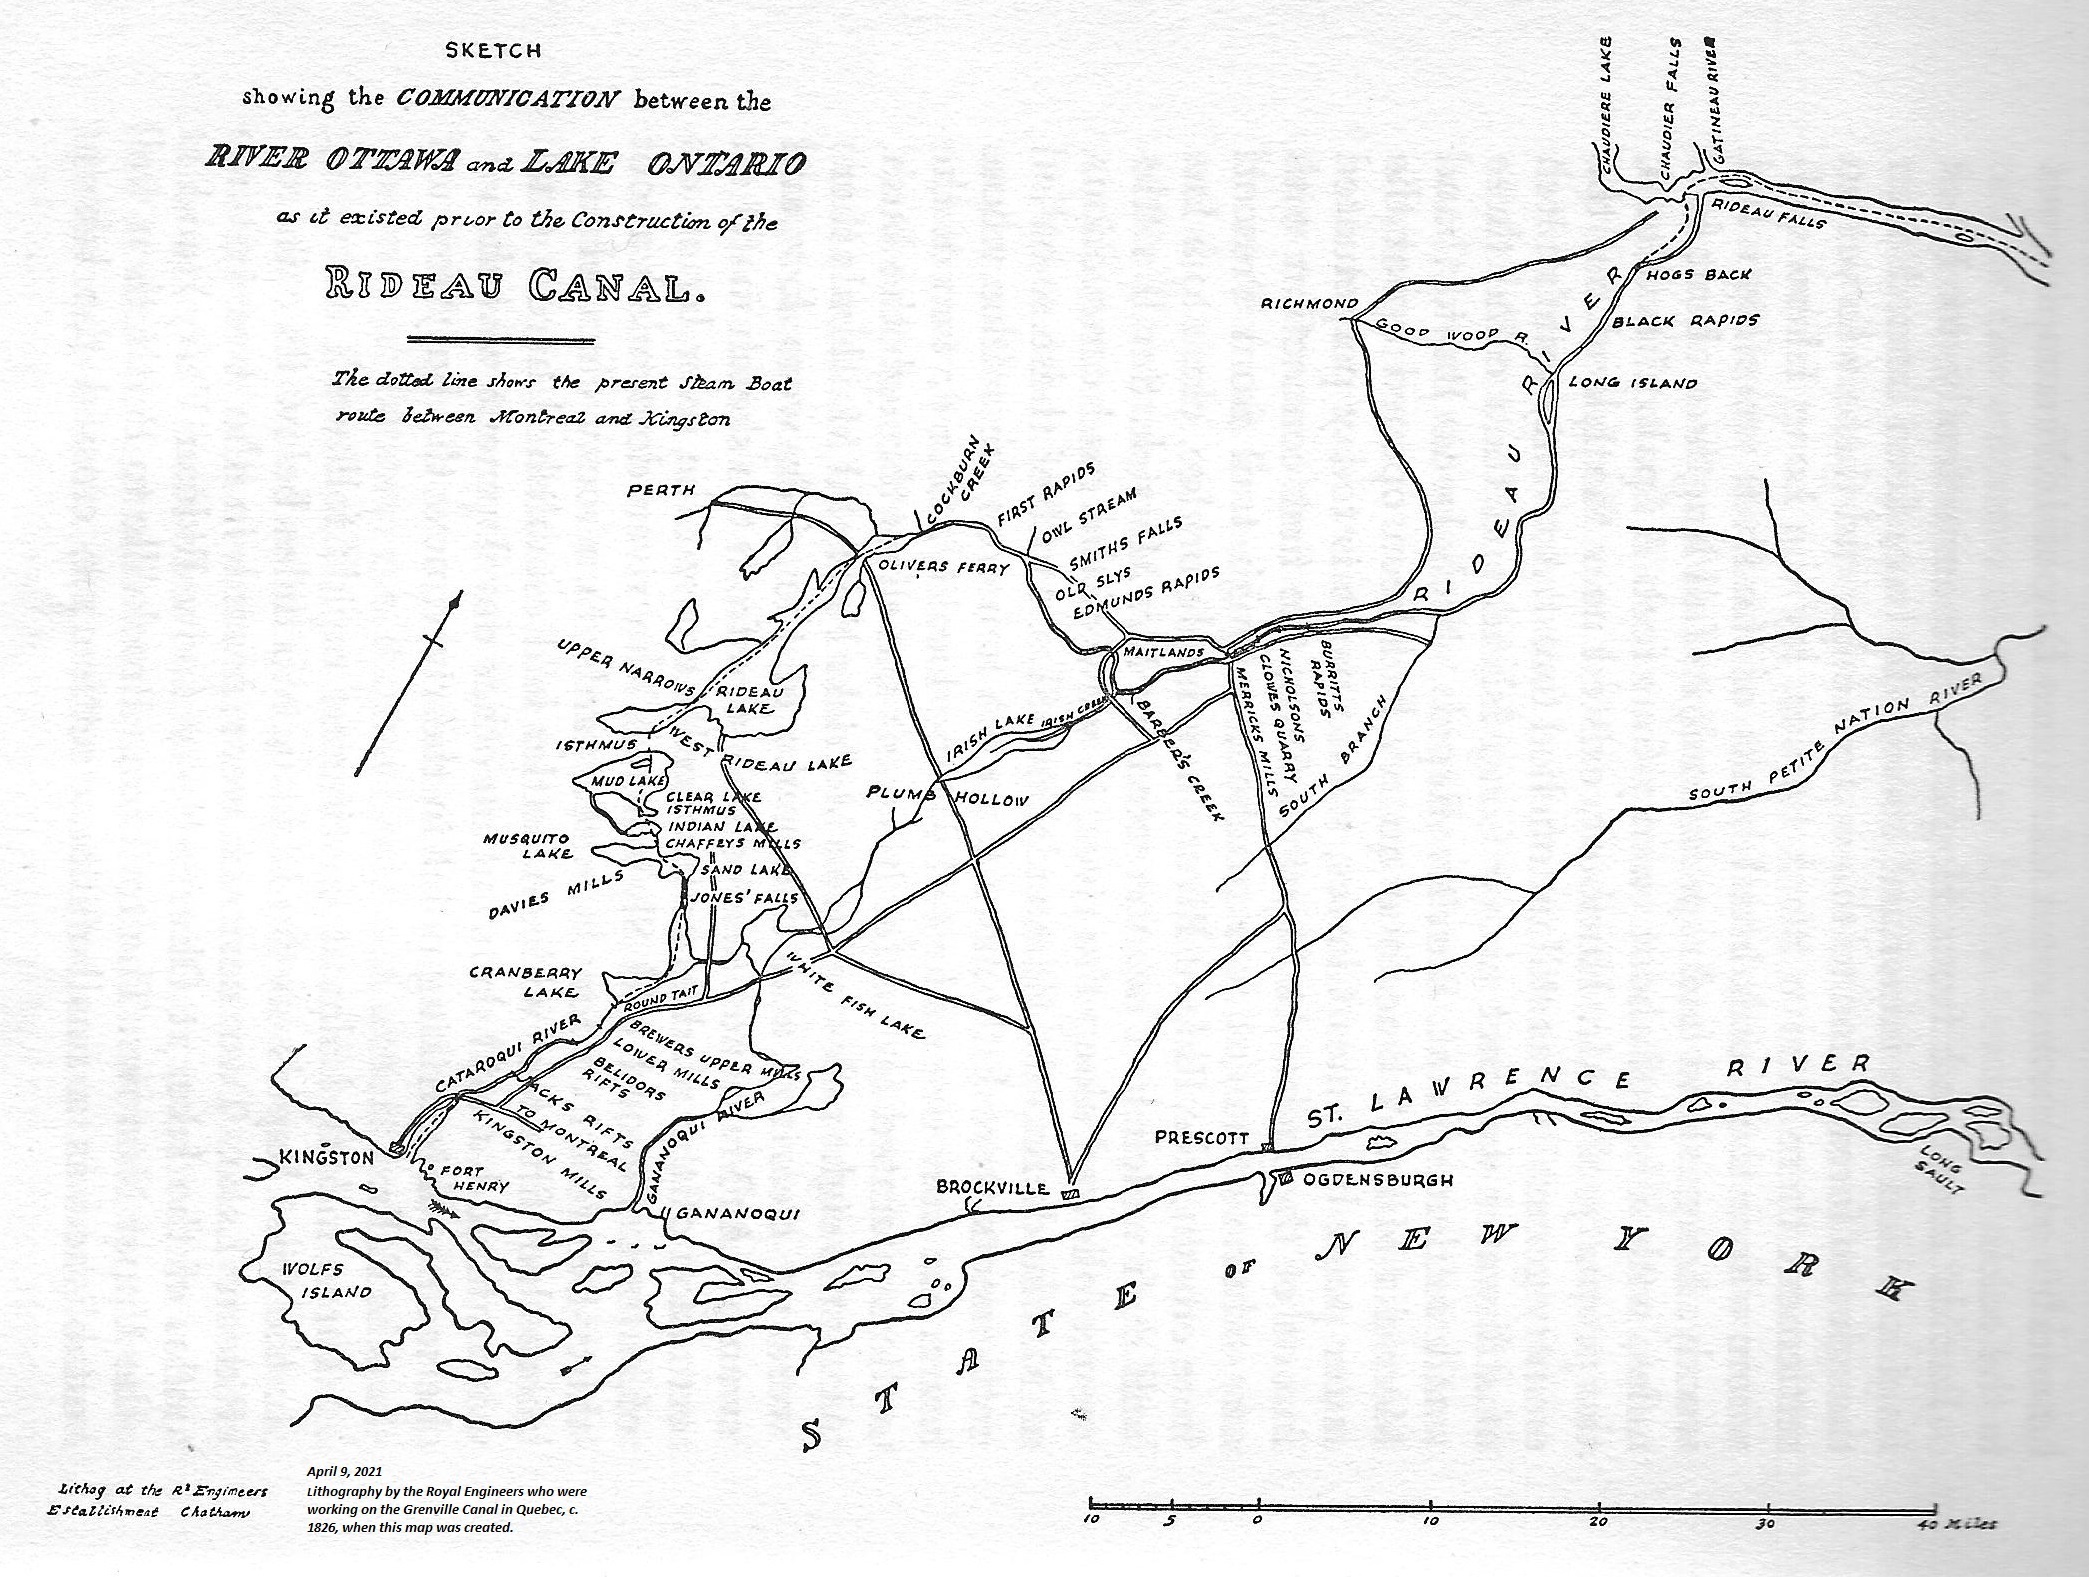 Canal Map, 1826, by the Royal Engineers from Text Book